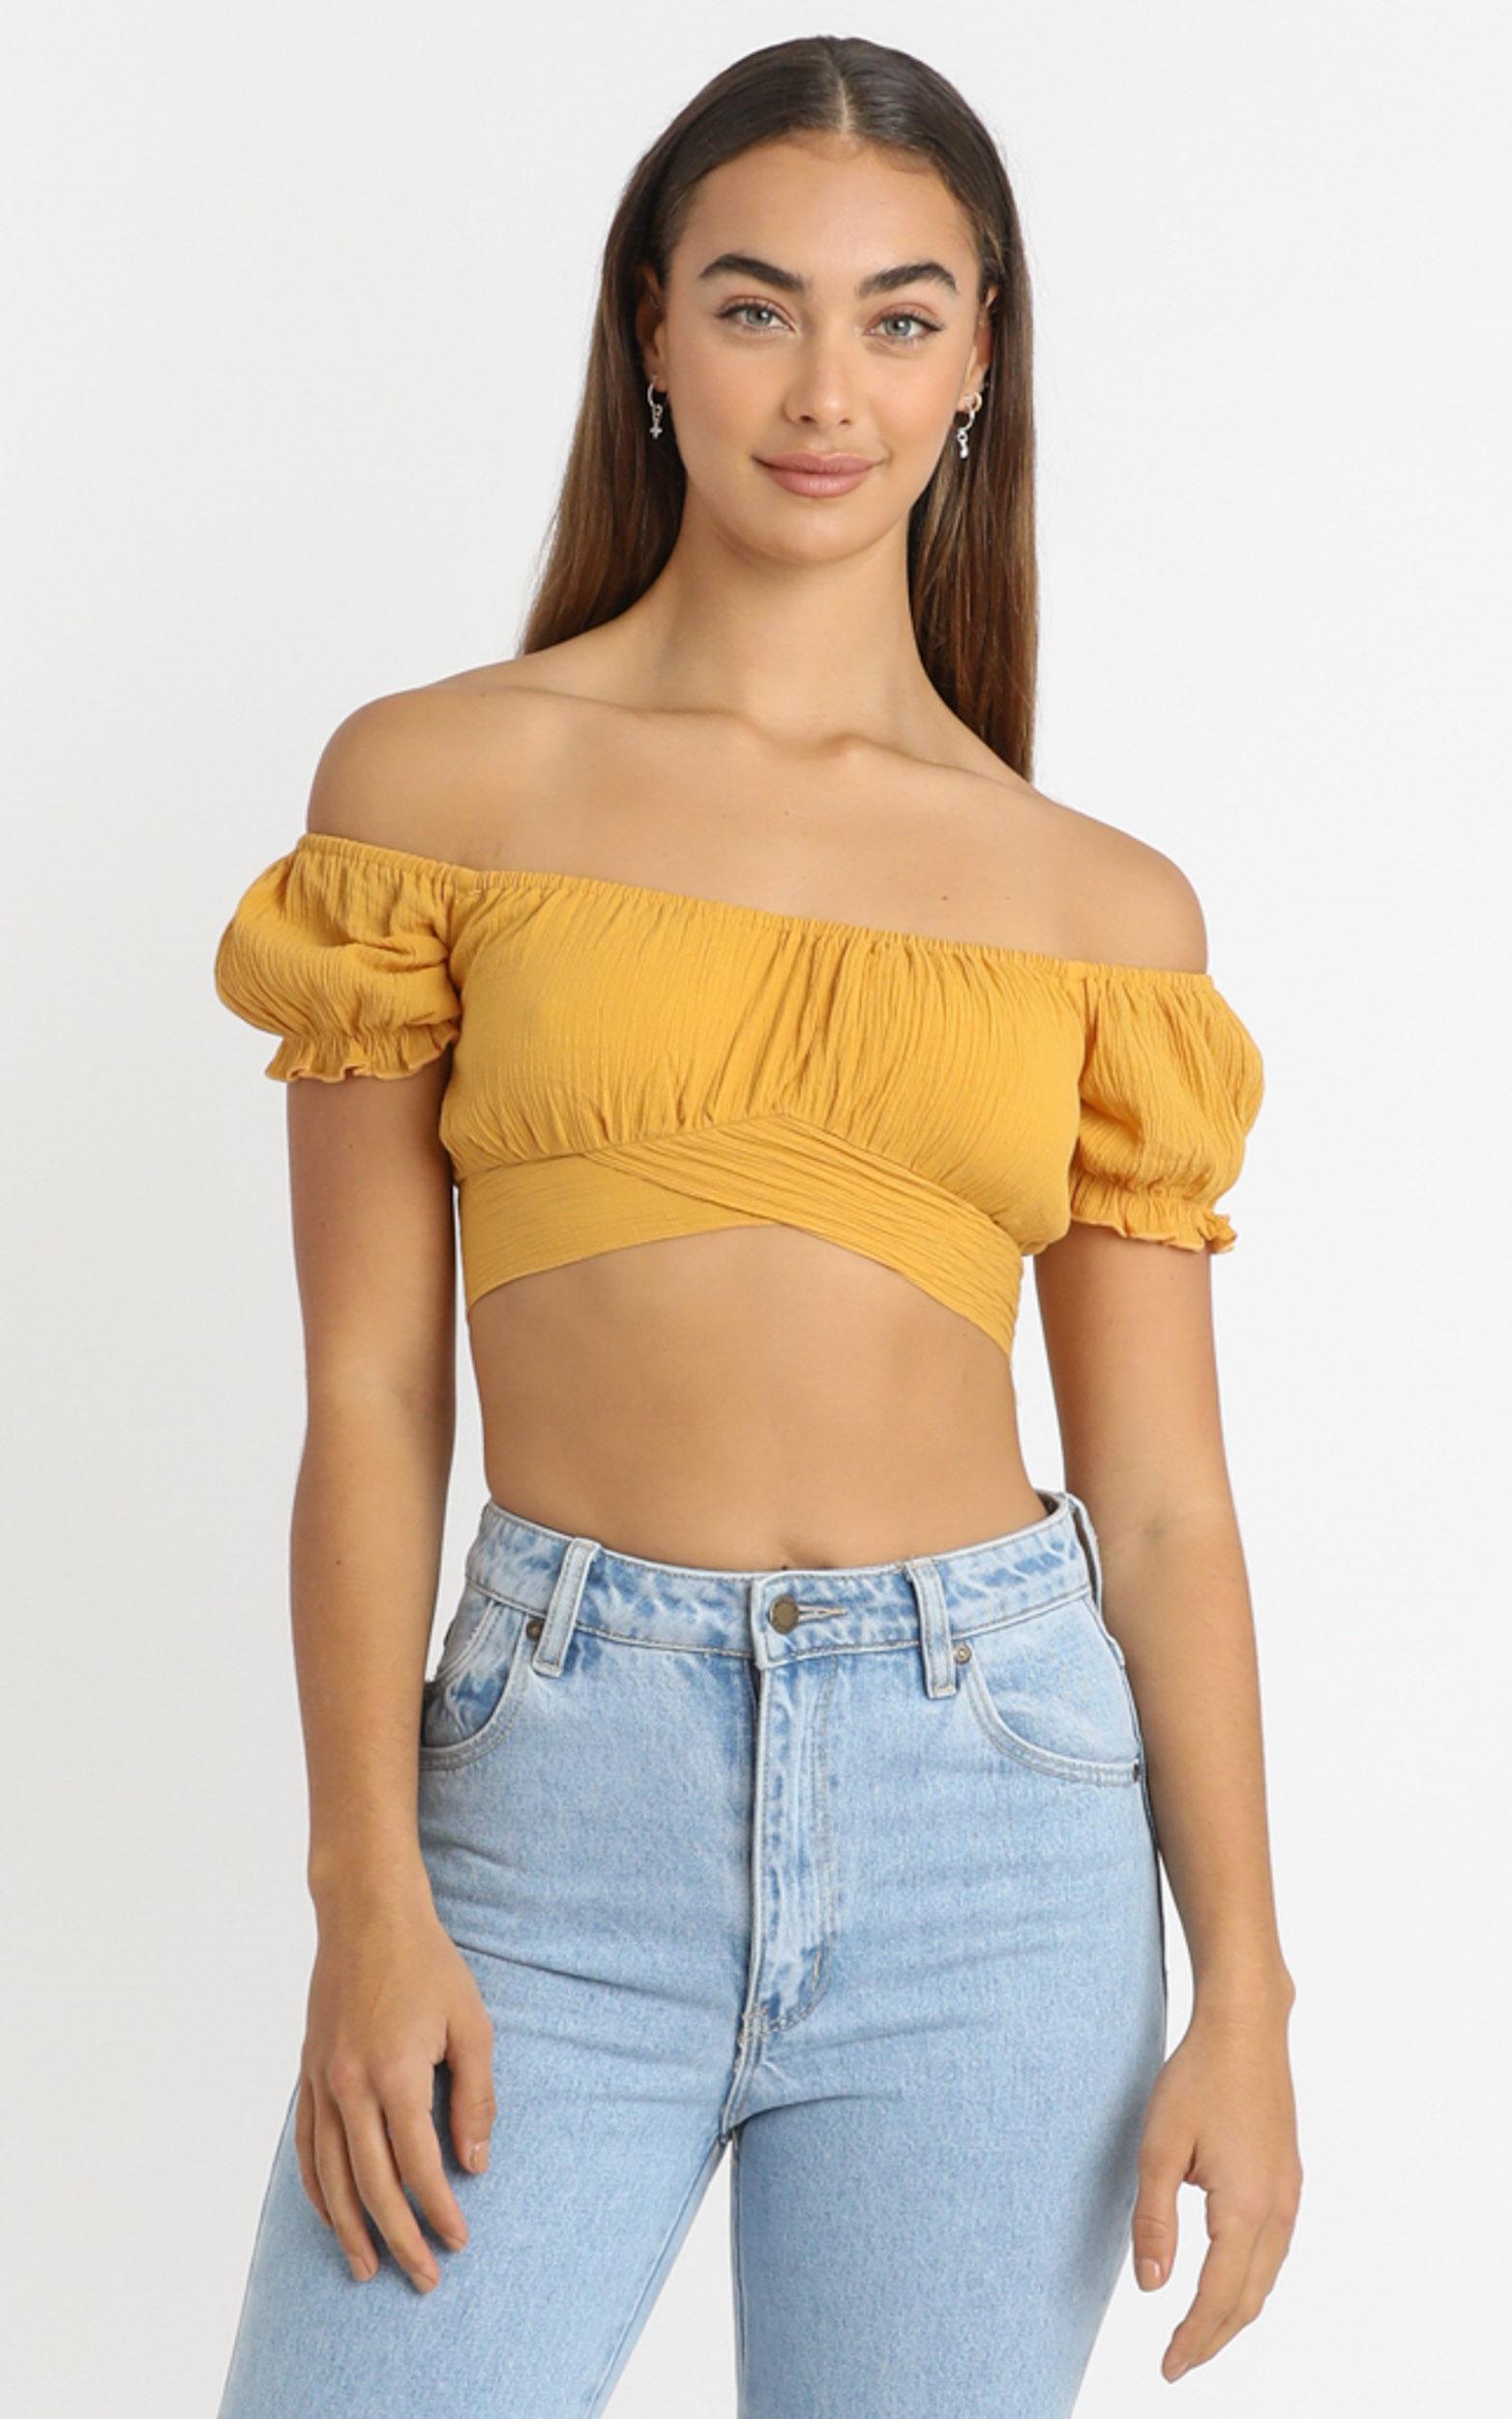 I Know You Top in mustard linen look - 06, YEL3, hi-res image number null